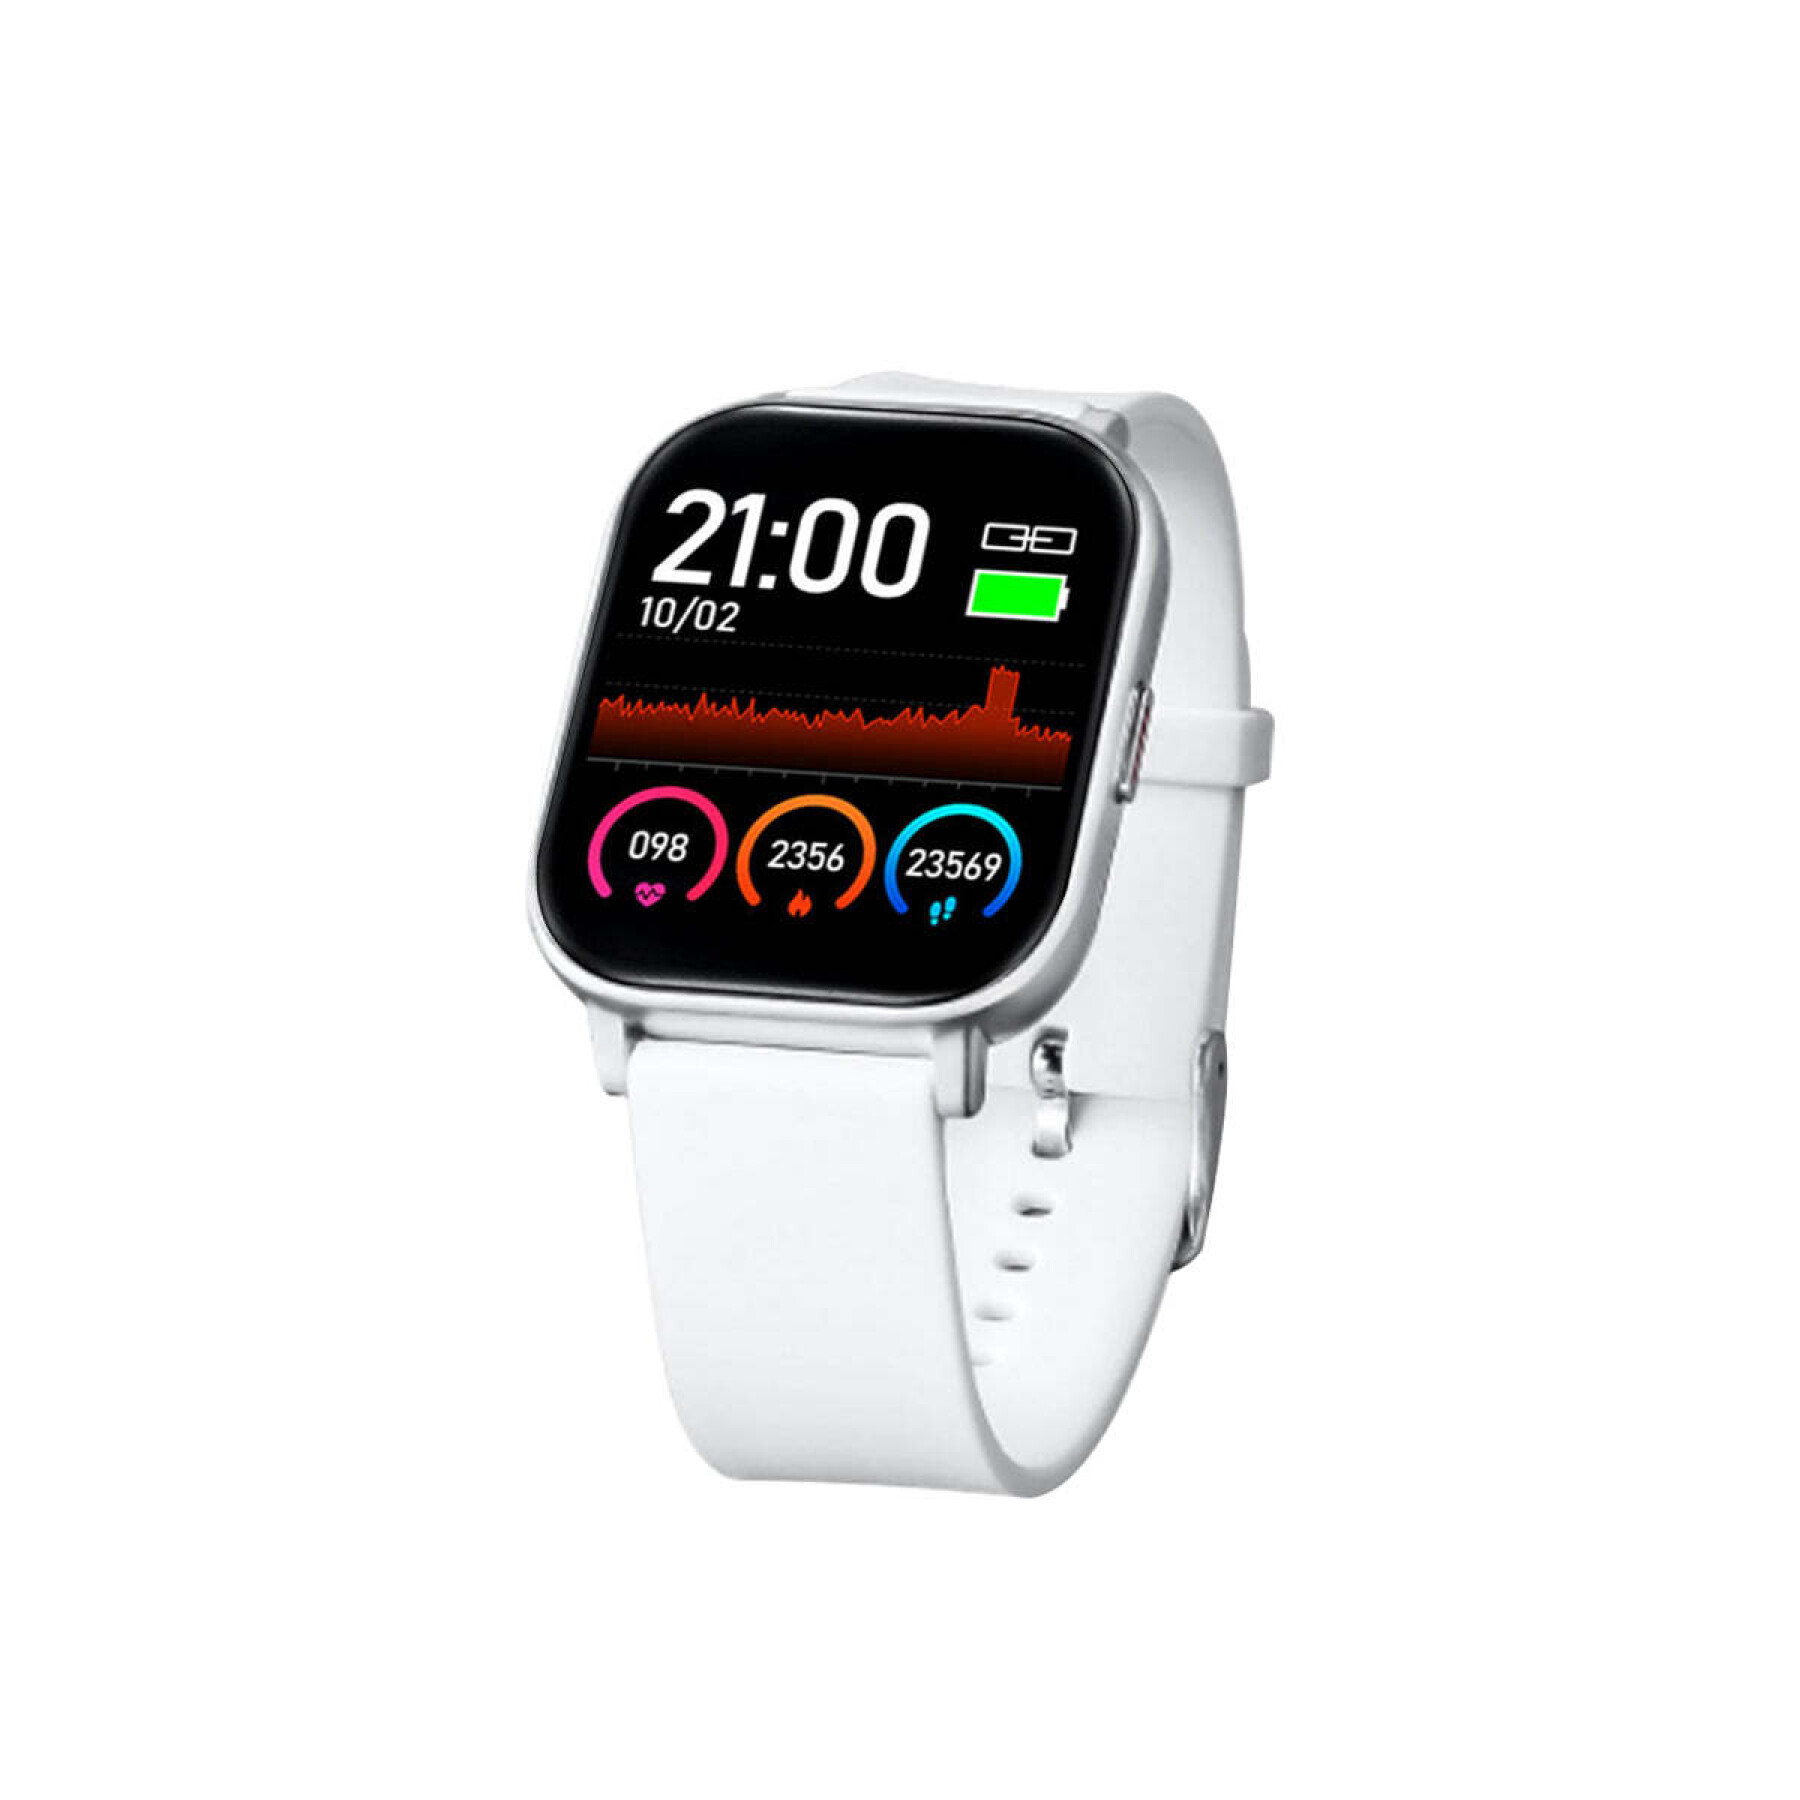 Montre connectée multisport compatible IOS&Android Platyne